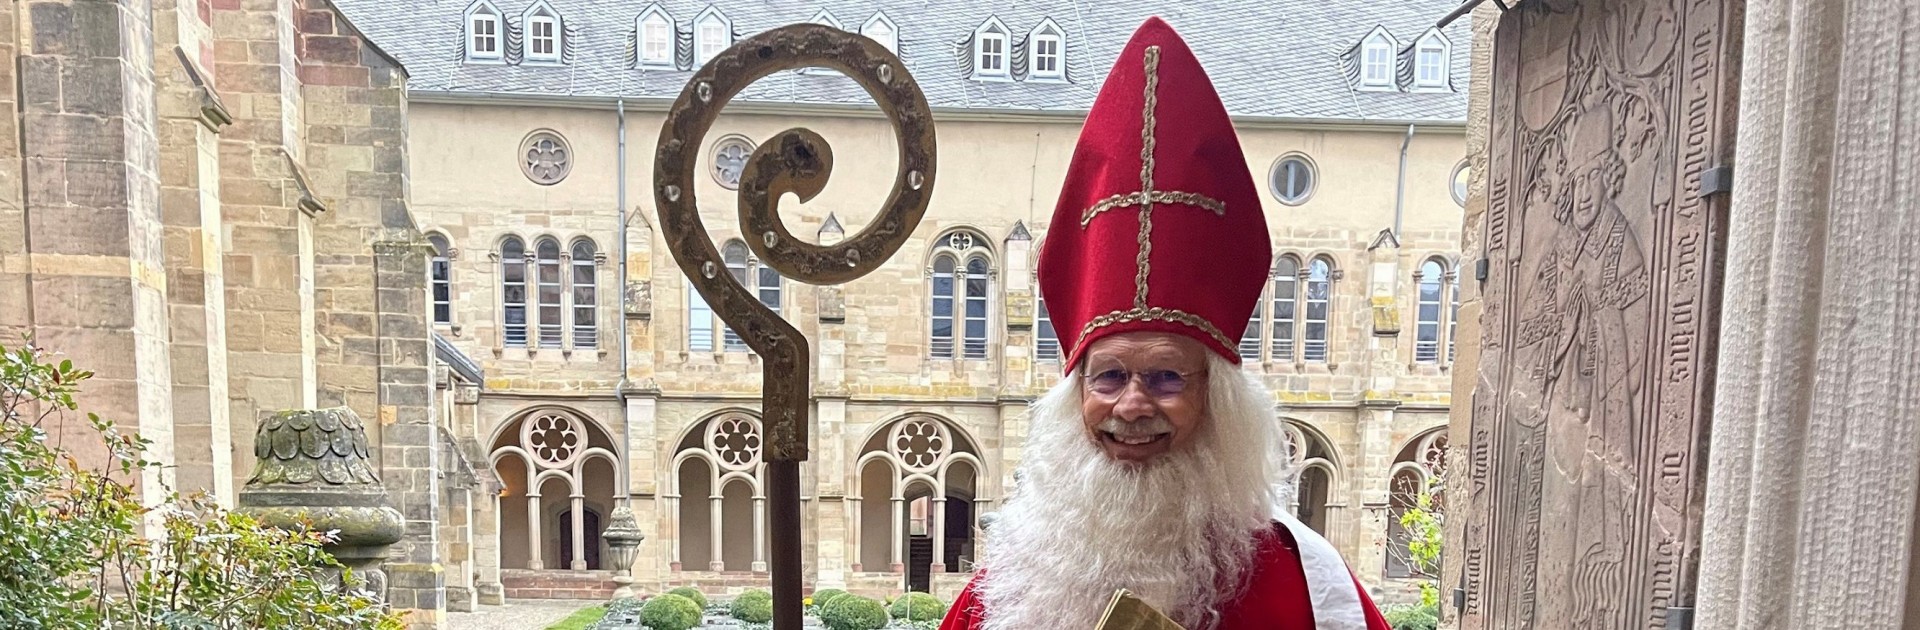 Saint Nicholas in the cloister of Trier Cathedral